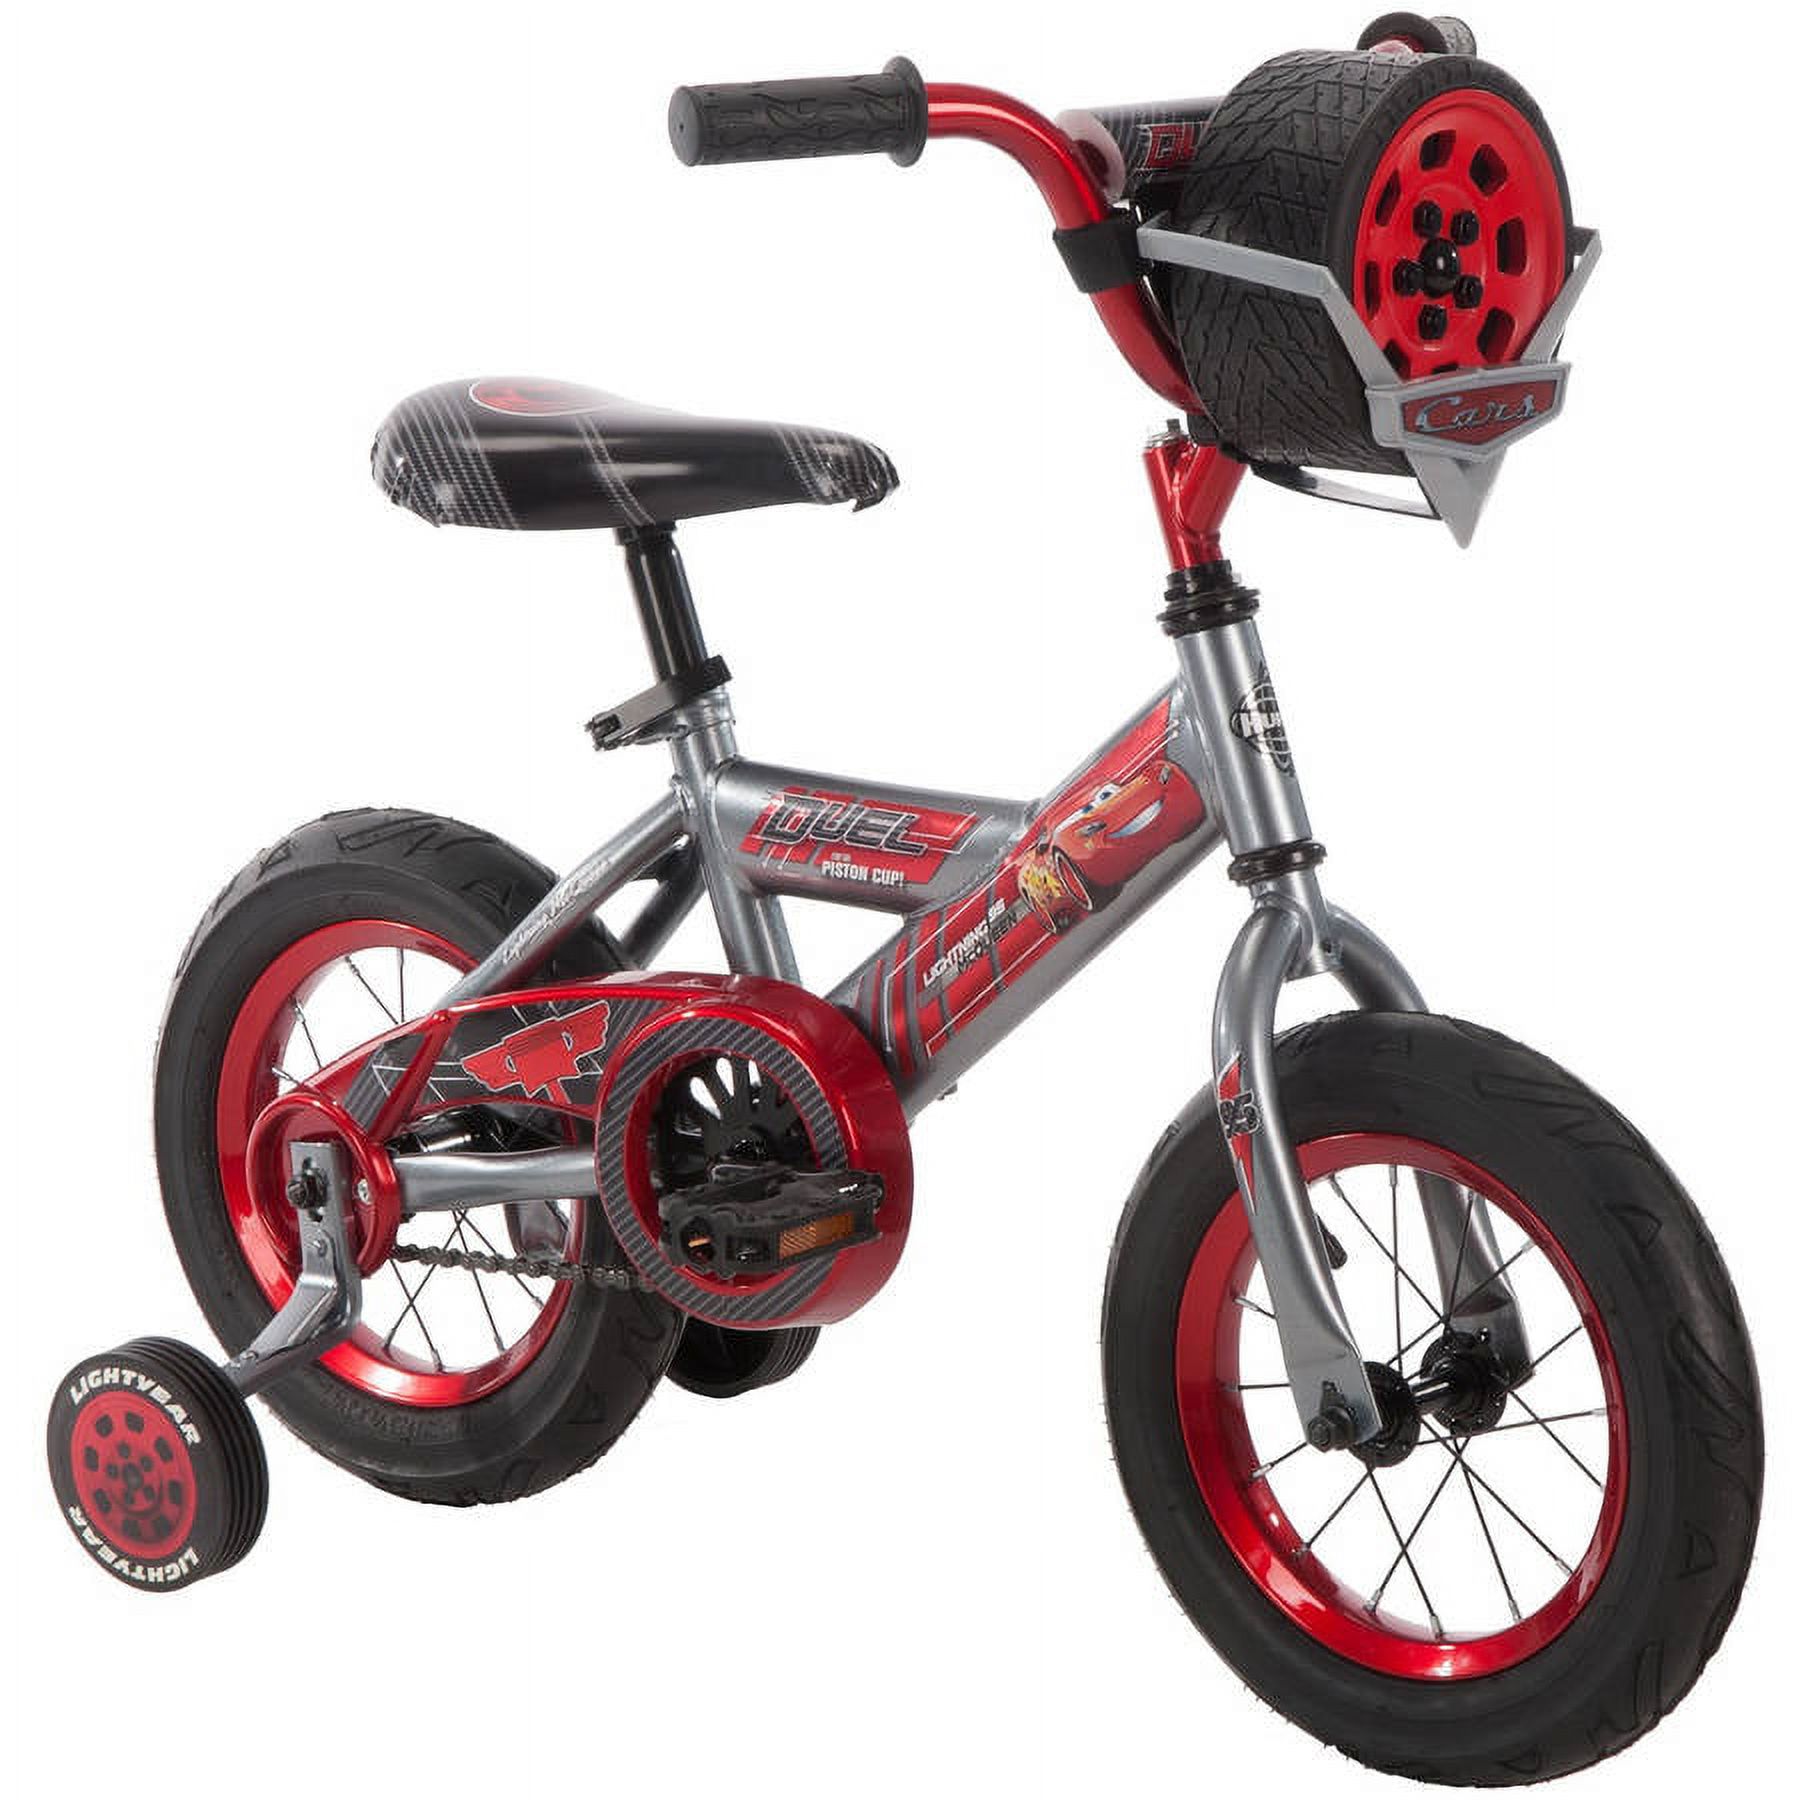 Disney Pixar Lightning McQueen 12" Boys' Red Bike with Sounds, by Huffy - image 1 of 8